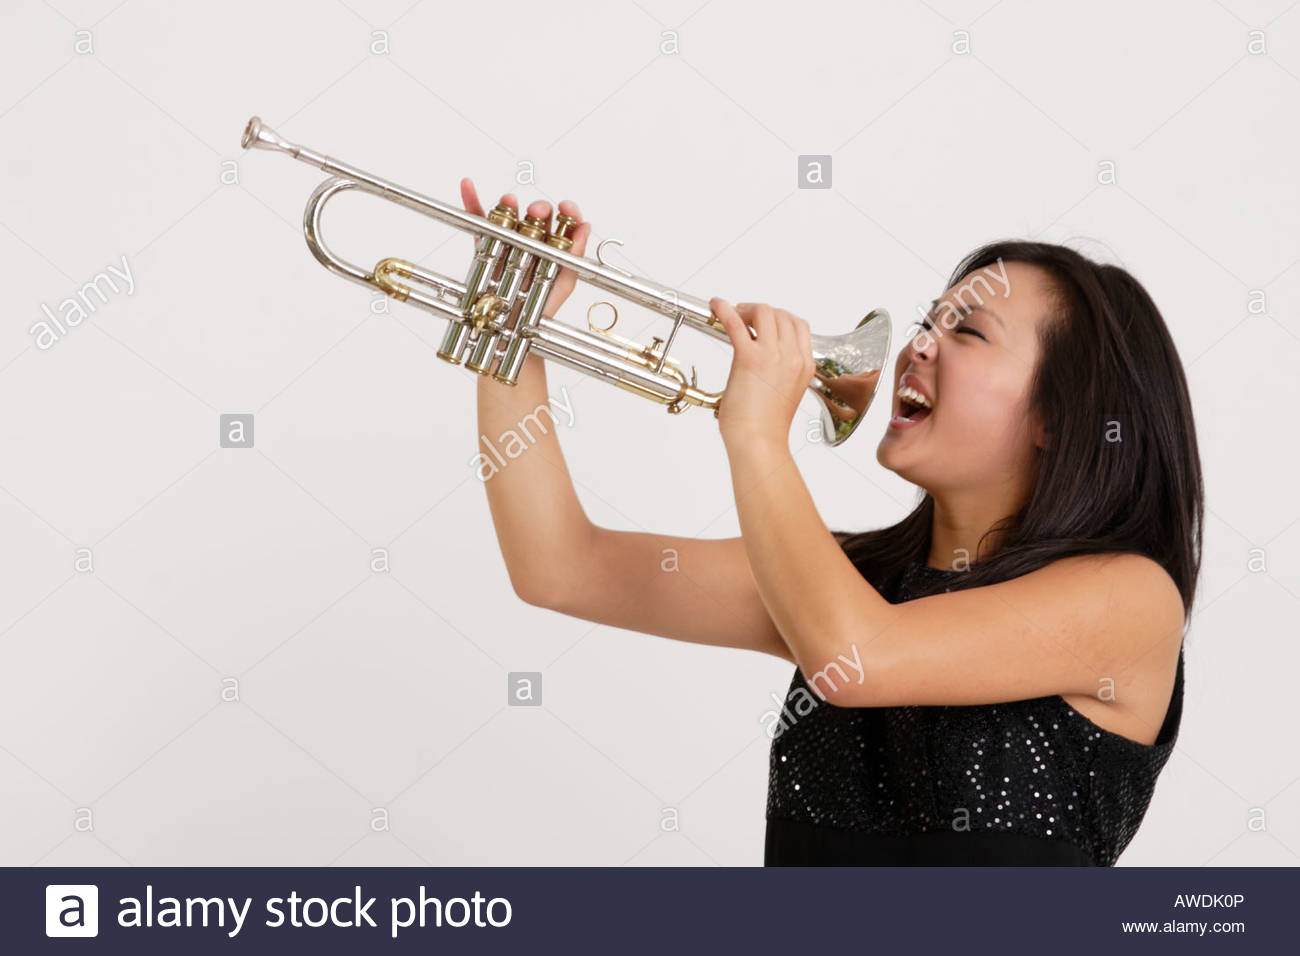 stock-photograph-of-a-pretty-asian-girl-screaming-into-a-trumpet-AWDK0P.jpg